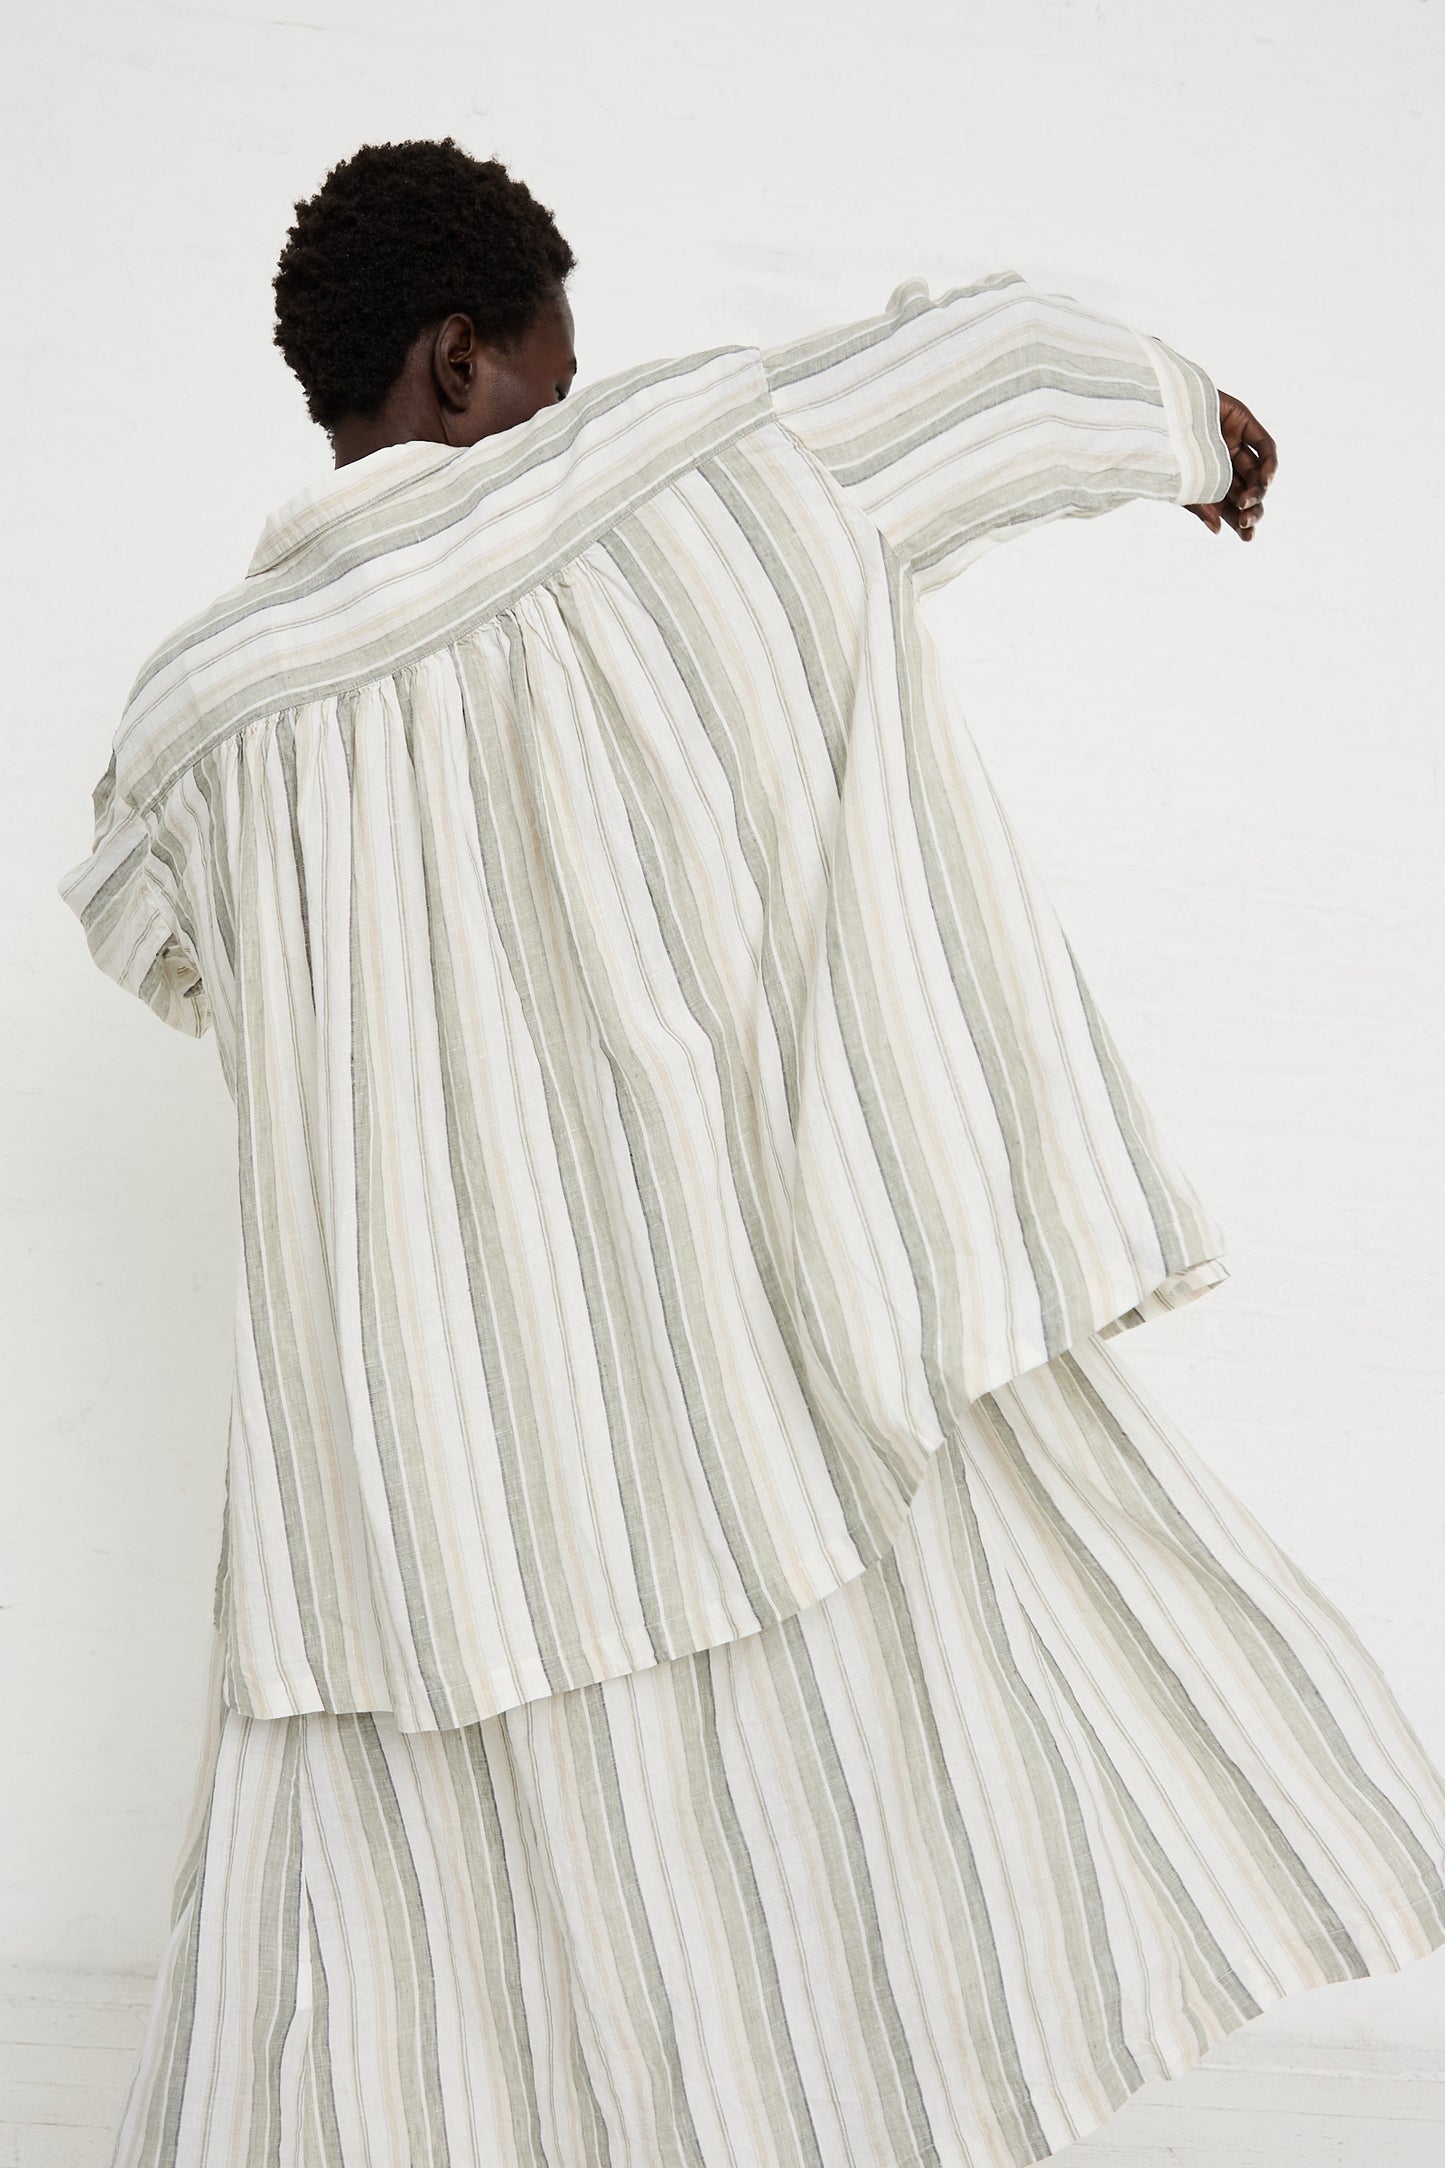 Person wearing a Linen Long Oversized Shirt in Stripe by nest Robe, with their back facing the camera, raising one arm slightly. The relaxed fit attire features flowing, vertical stripes in light and dark shades.